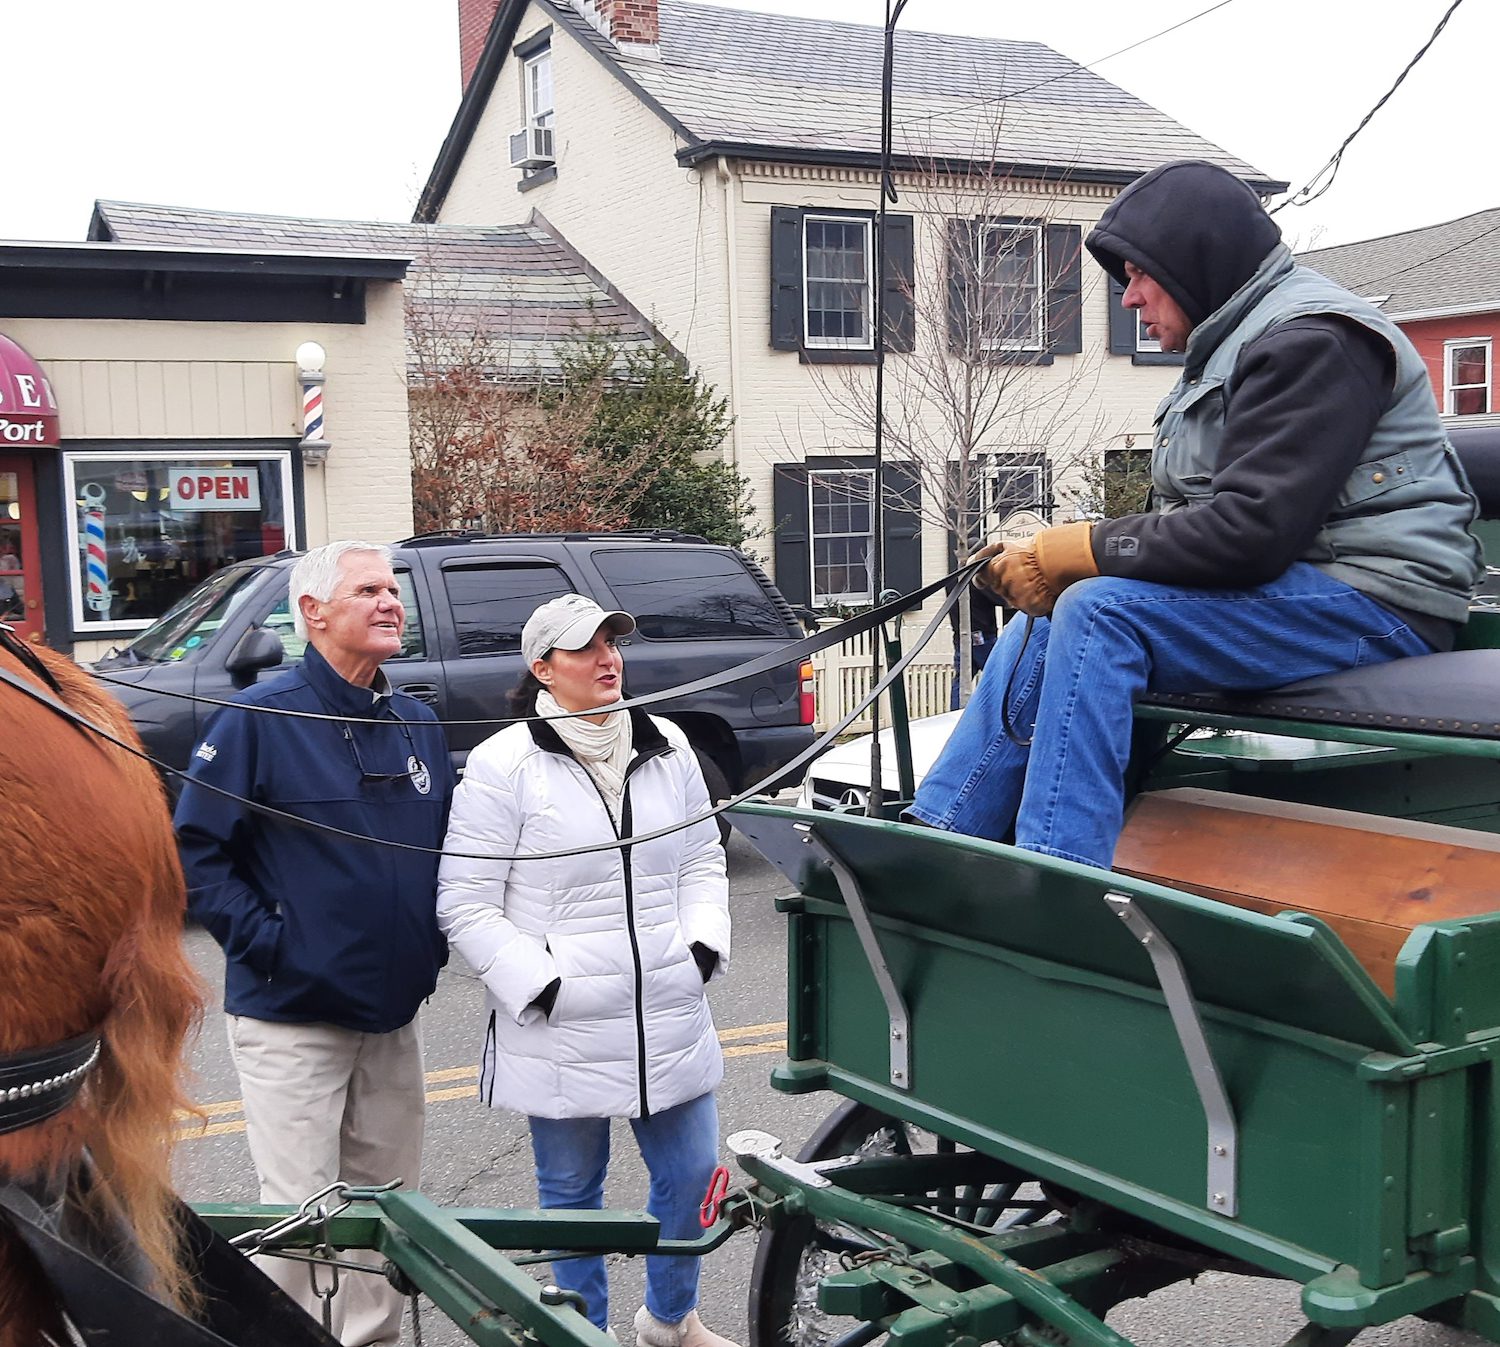 Thrills and chills in Port Jeff during annual ice fest TBR News Media